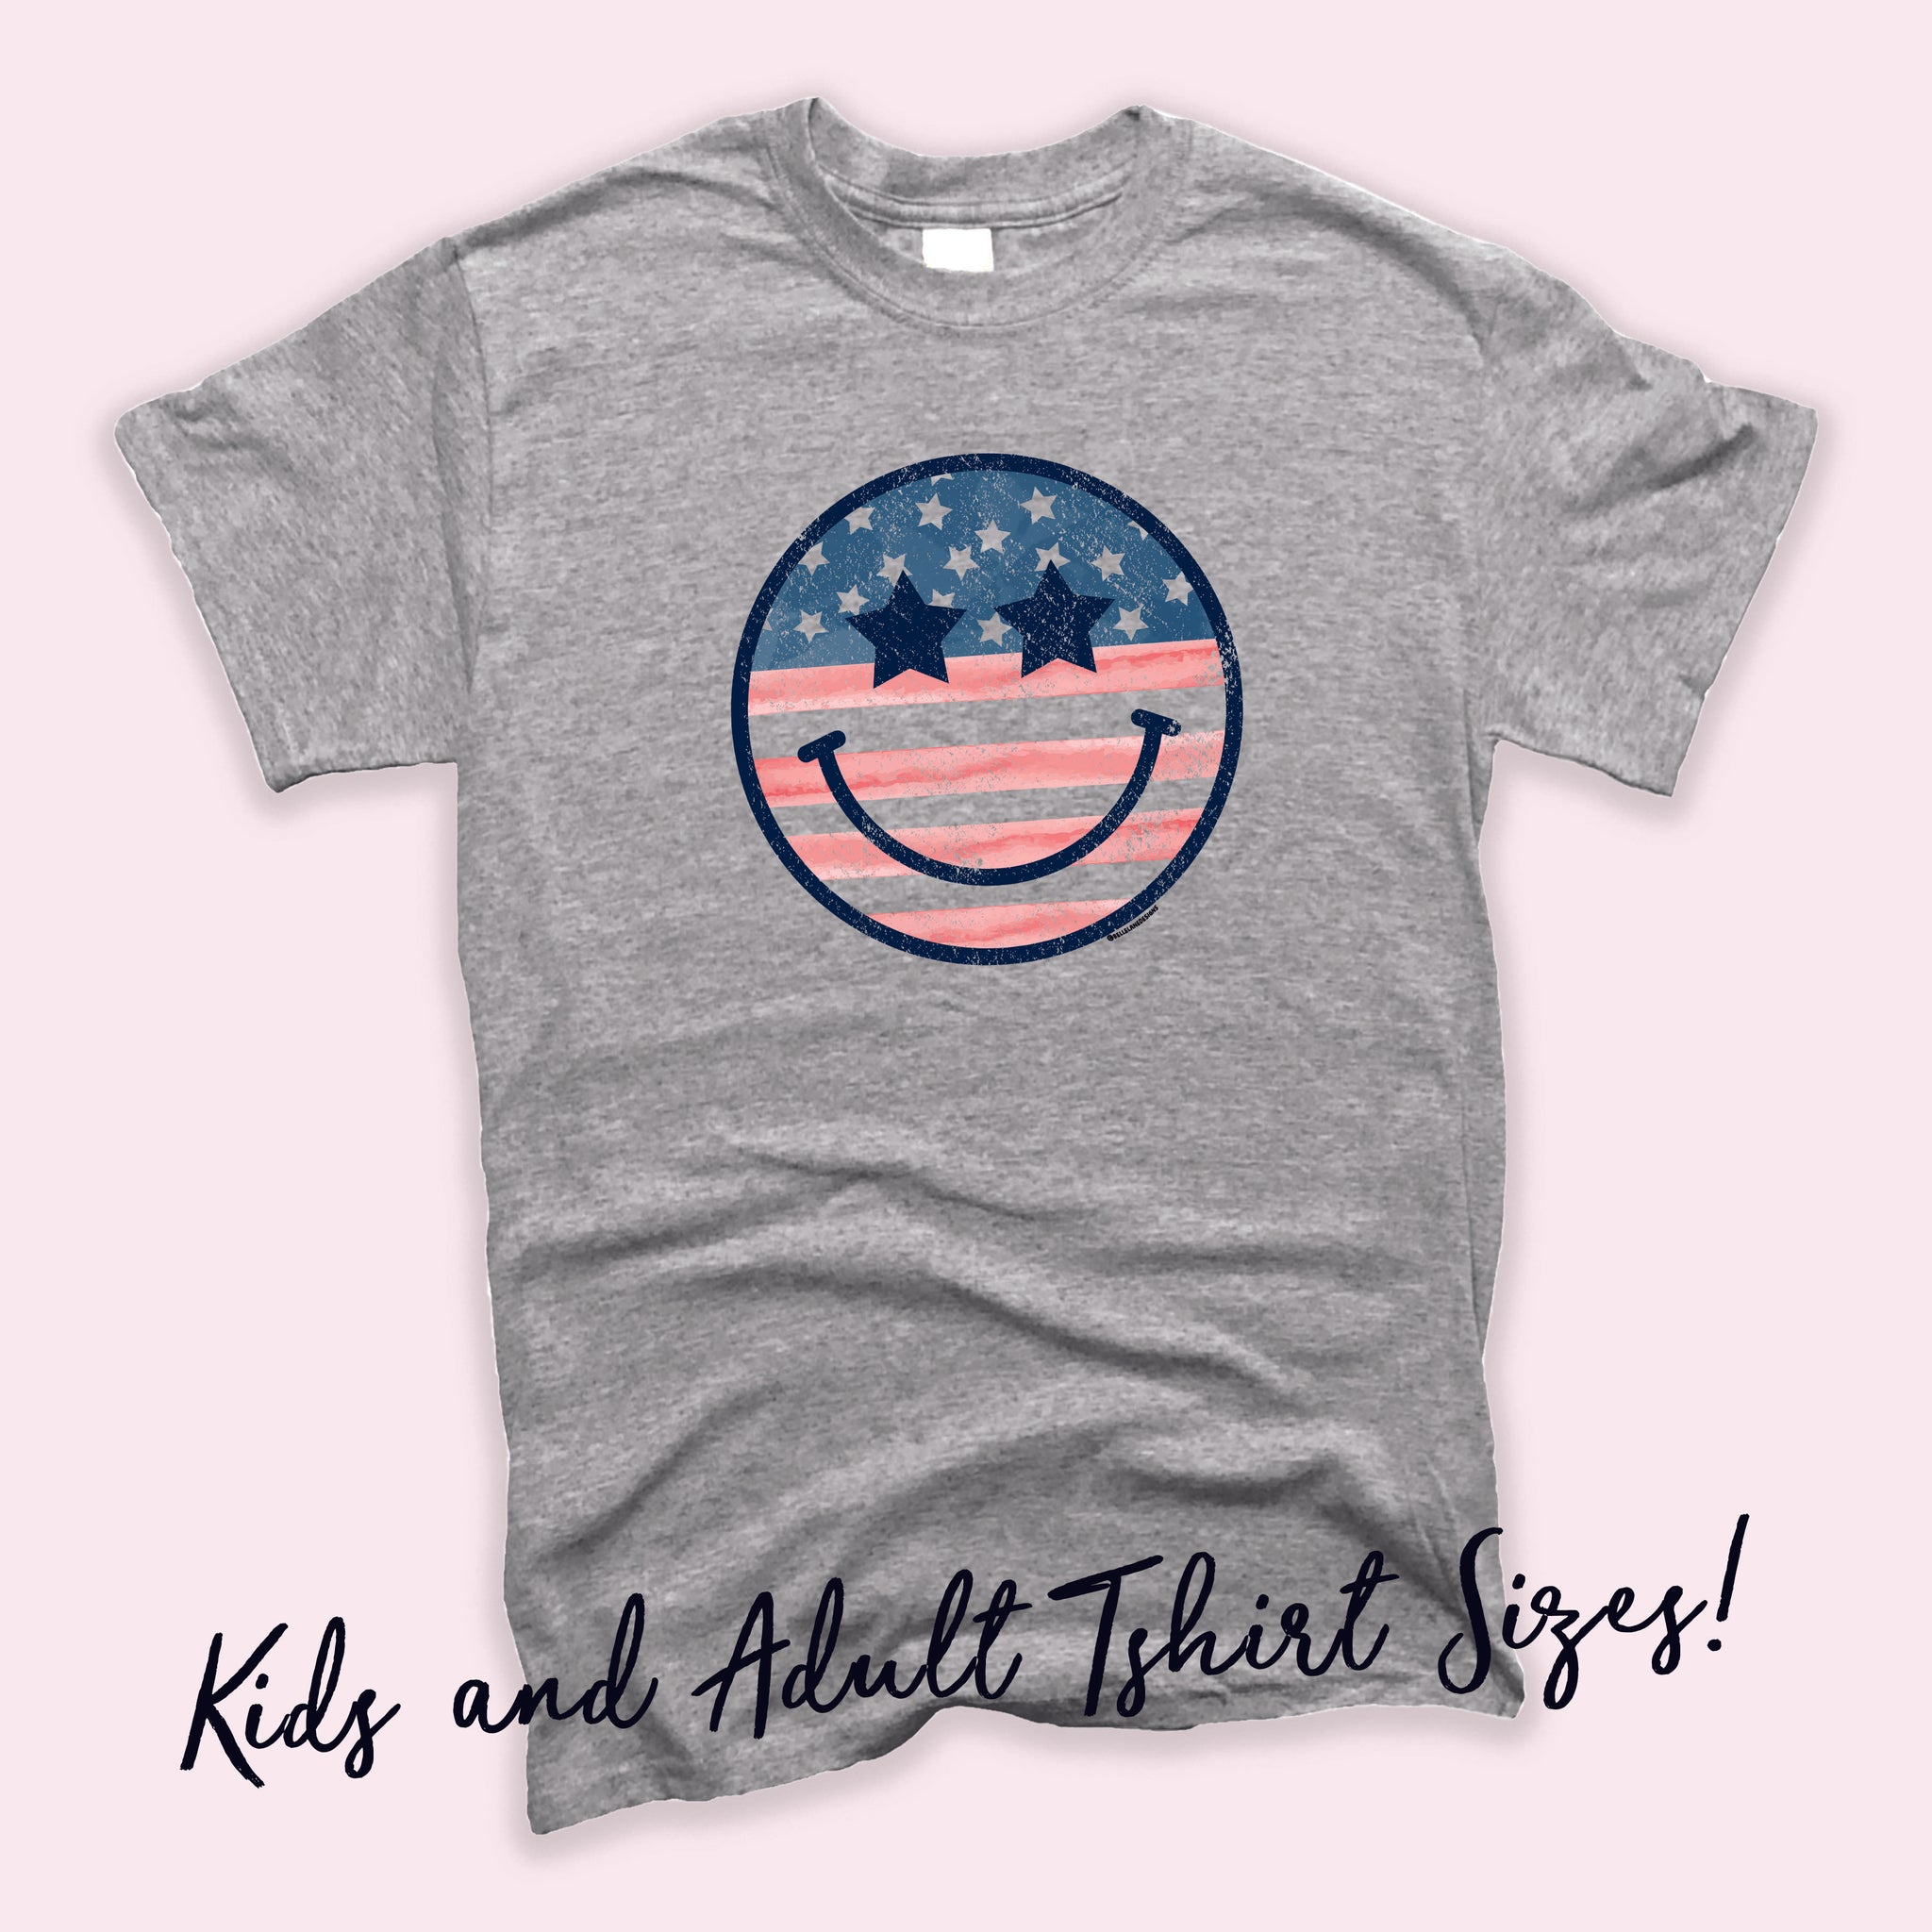 Grey Kid's or Adult Smiley Face American Flag Tshirt | Patriotic, Memorial Day, 4th of July | Summer Fun | Mommy and Me 009